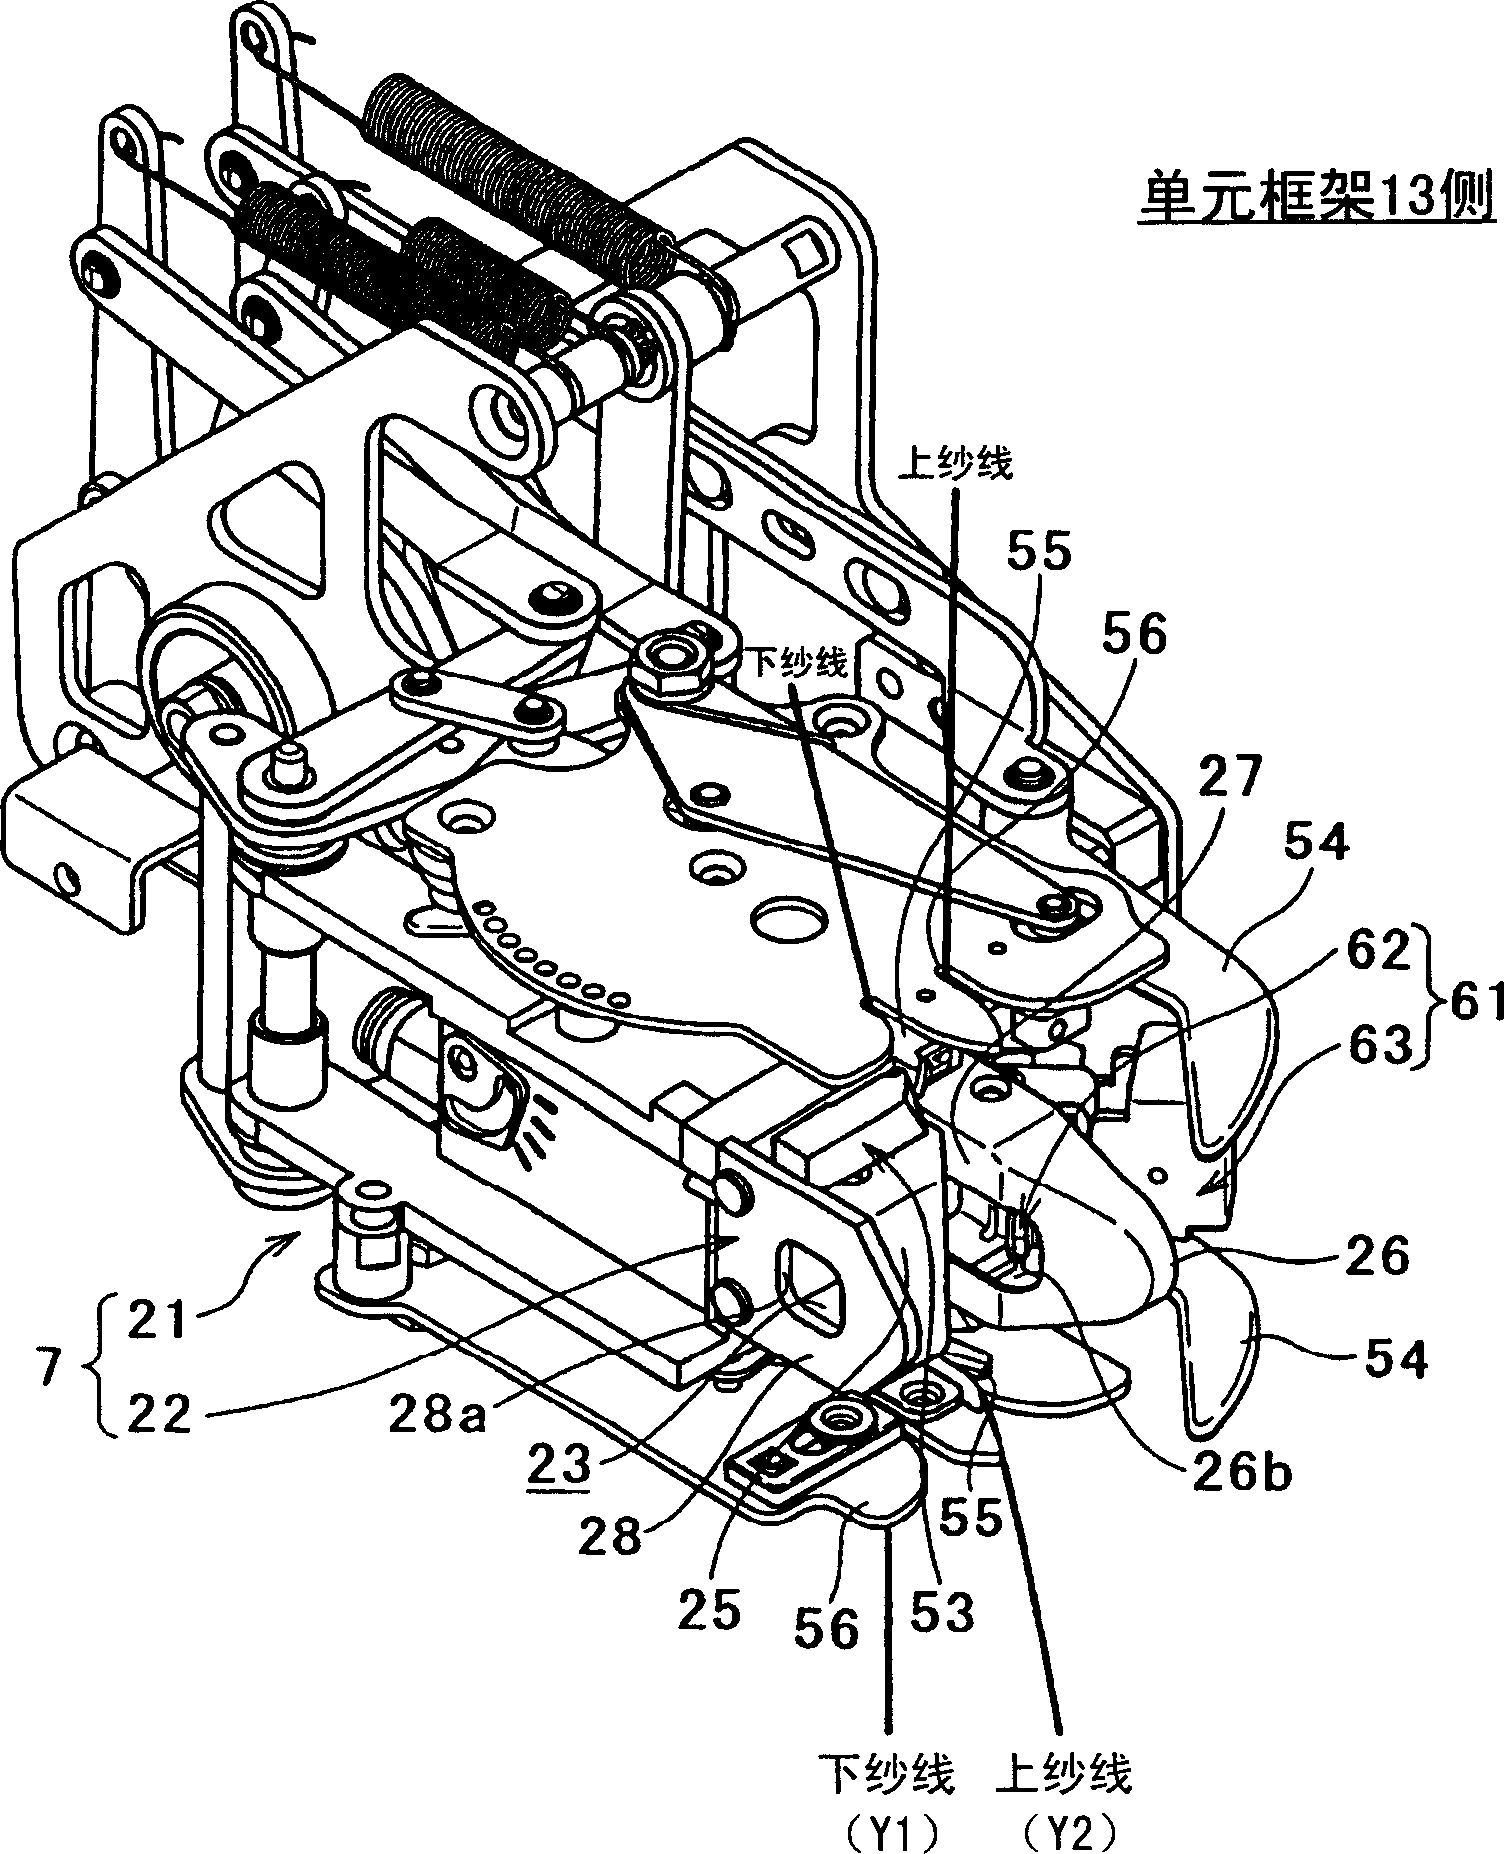 Splicing device, yarn splicing method and joint